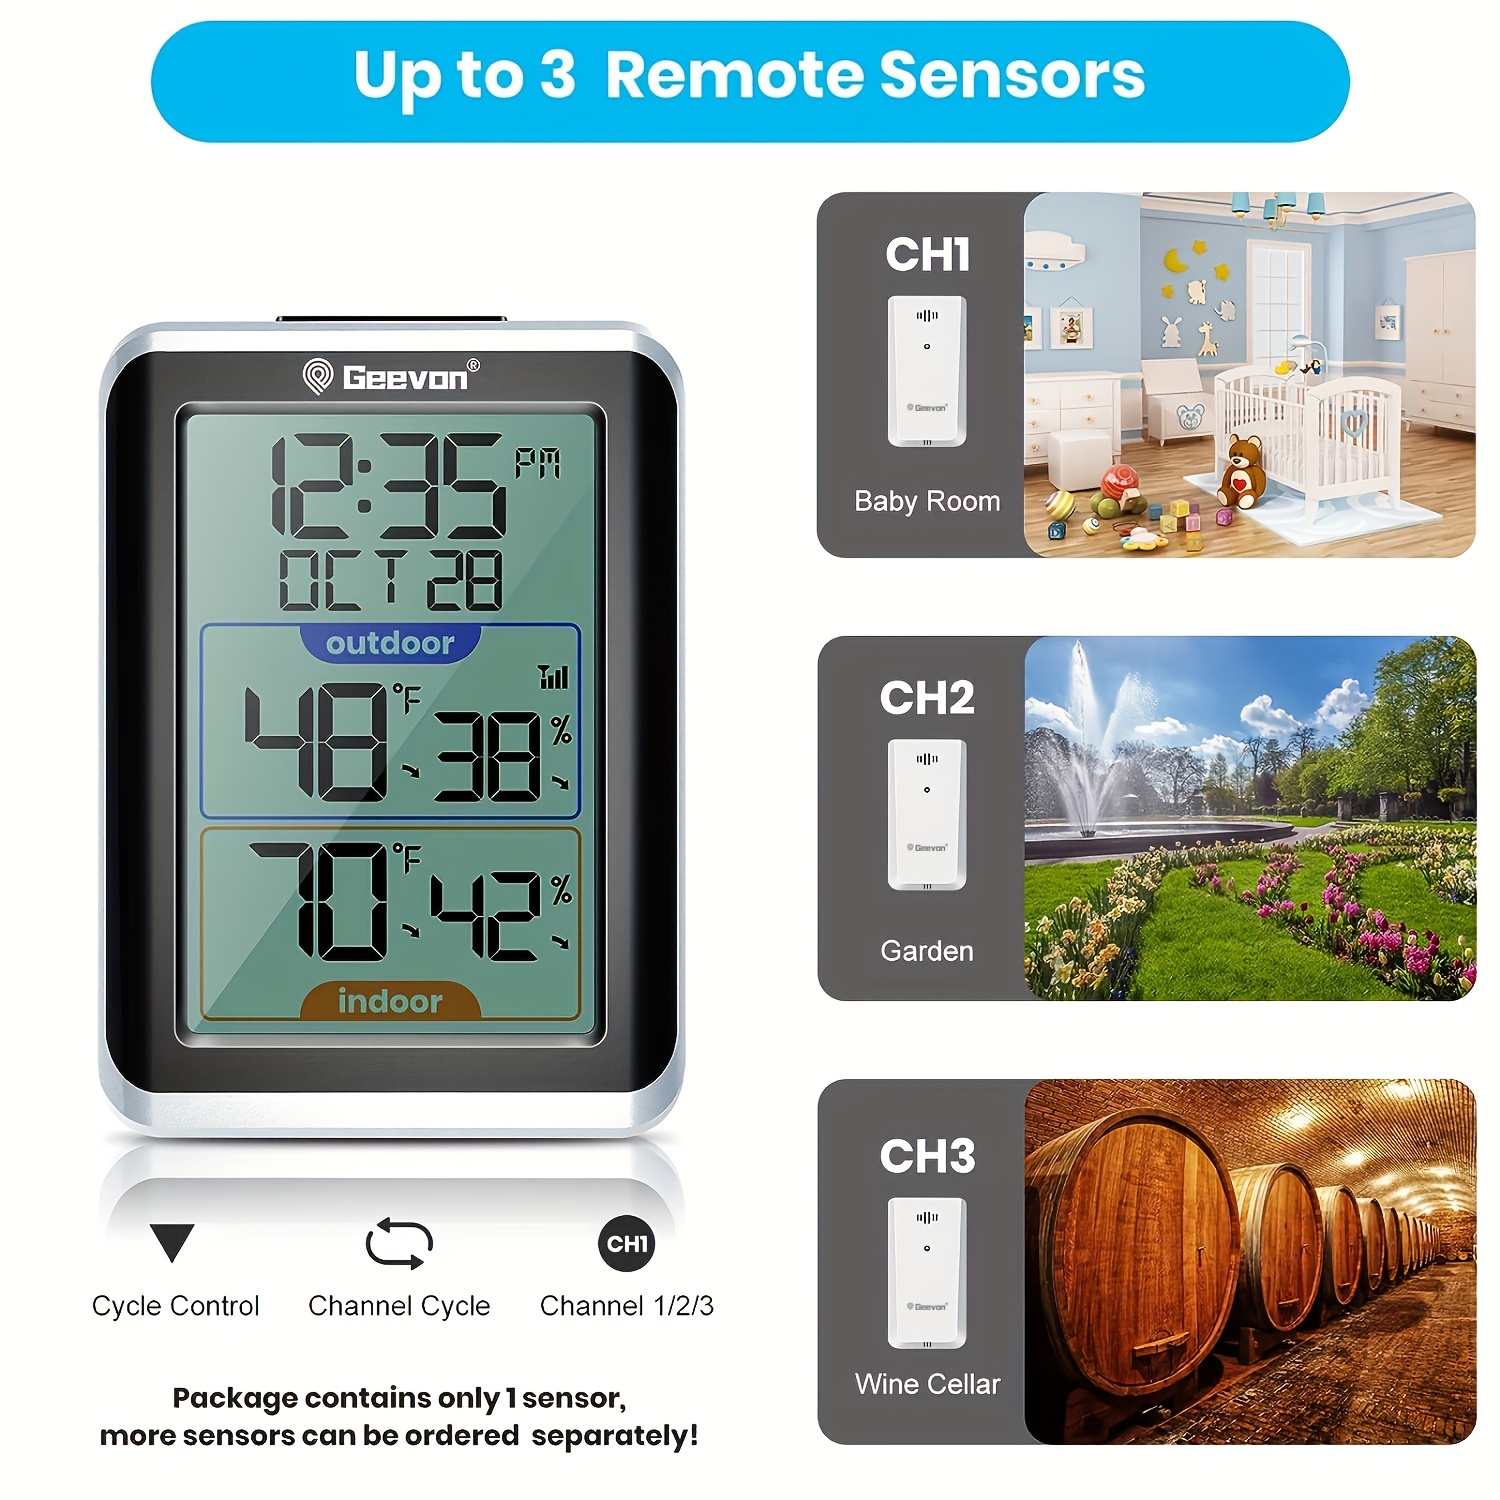 ThermoPro Digital Wireless Indoor or Outdoor White Hygrometer and